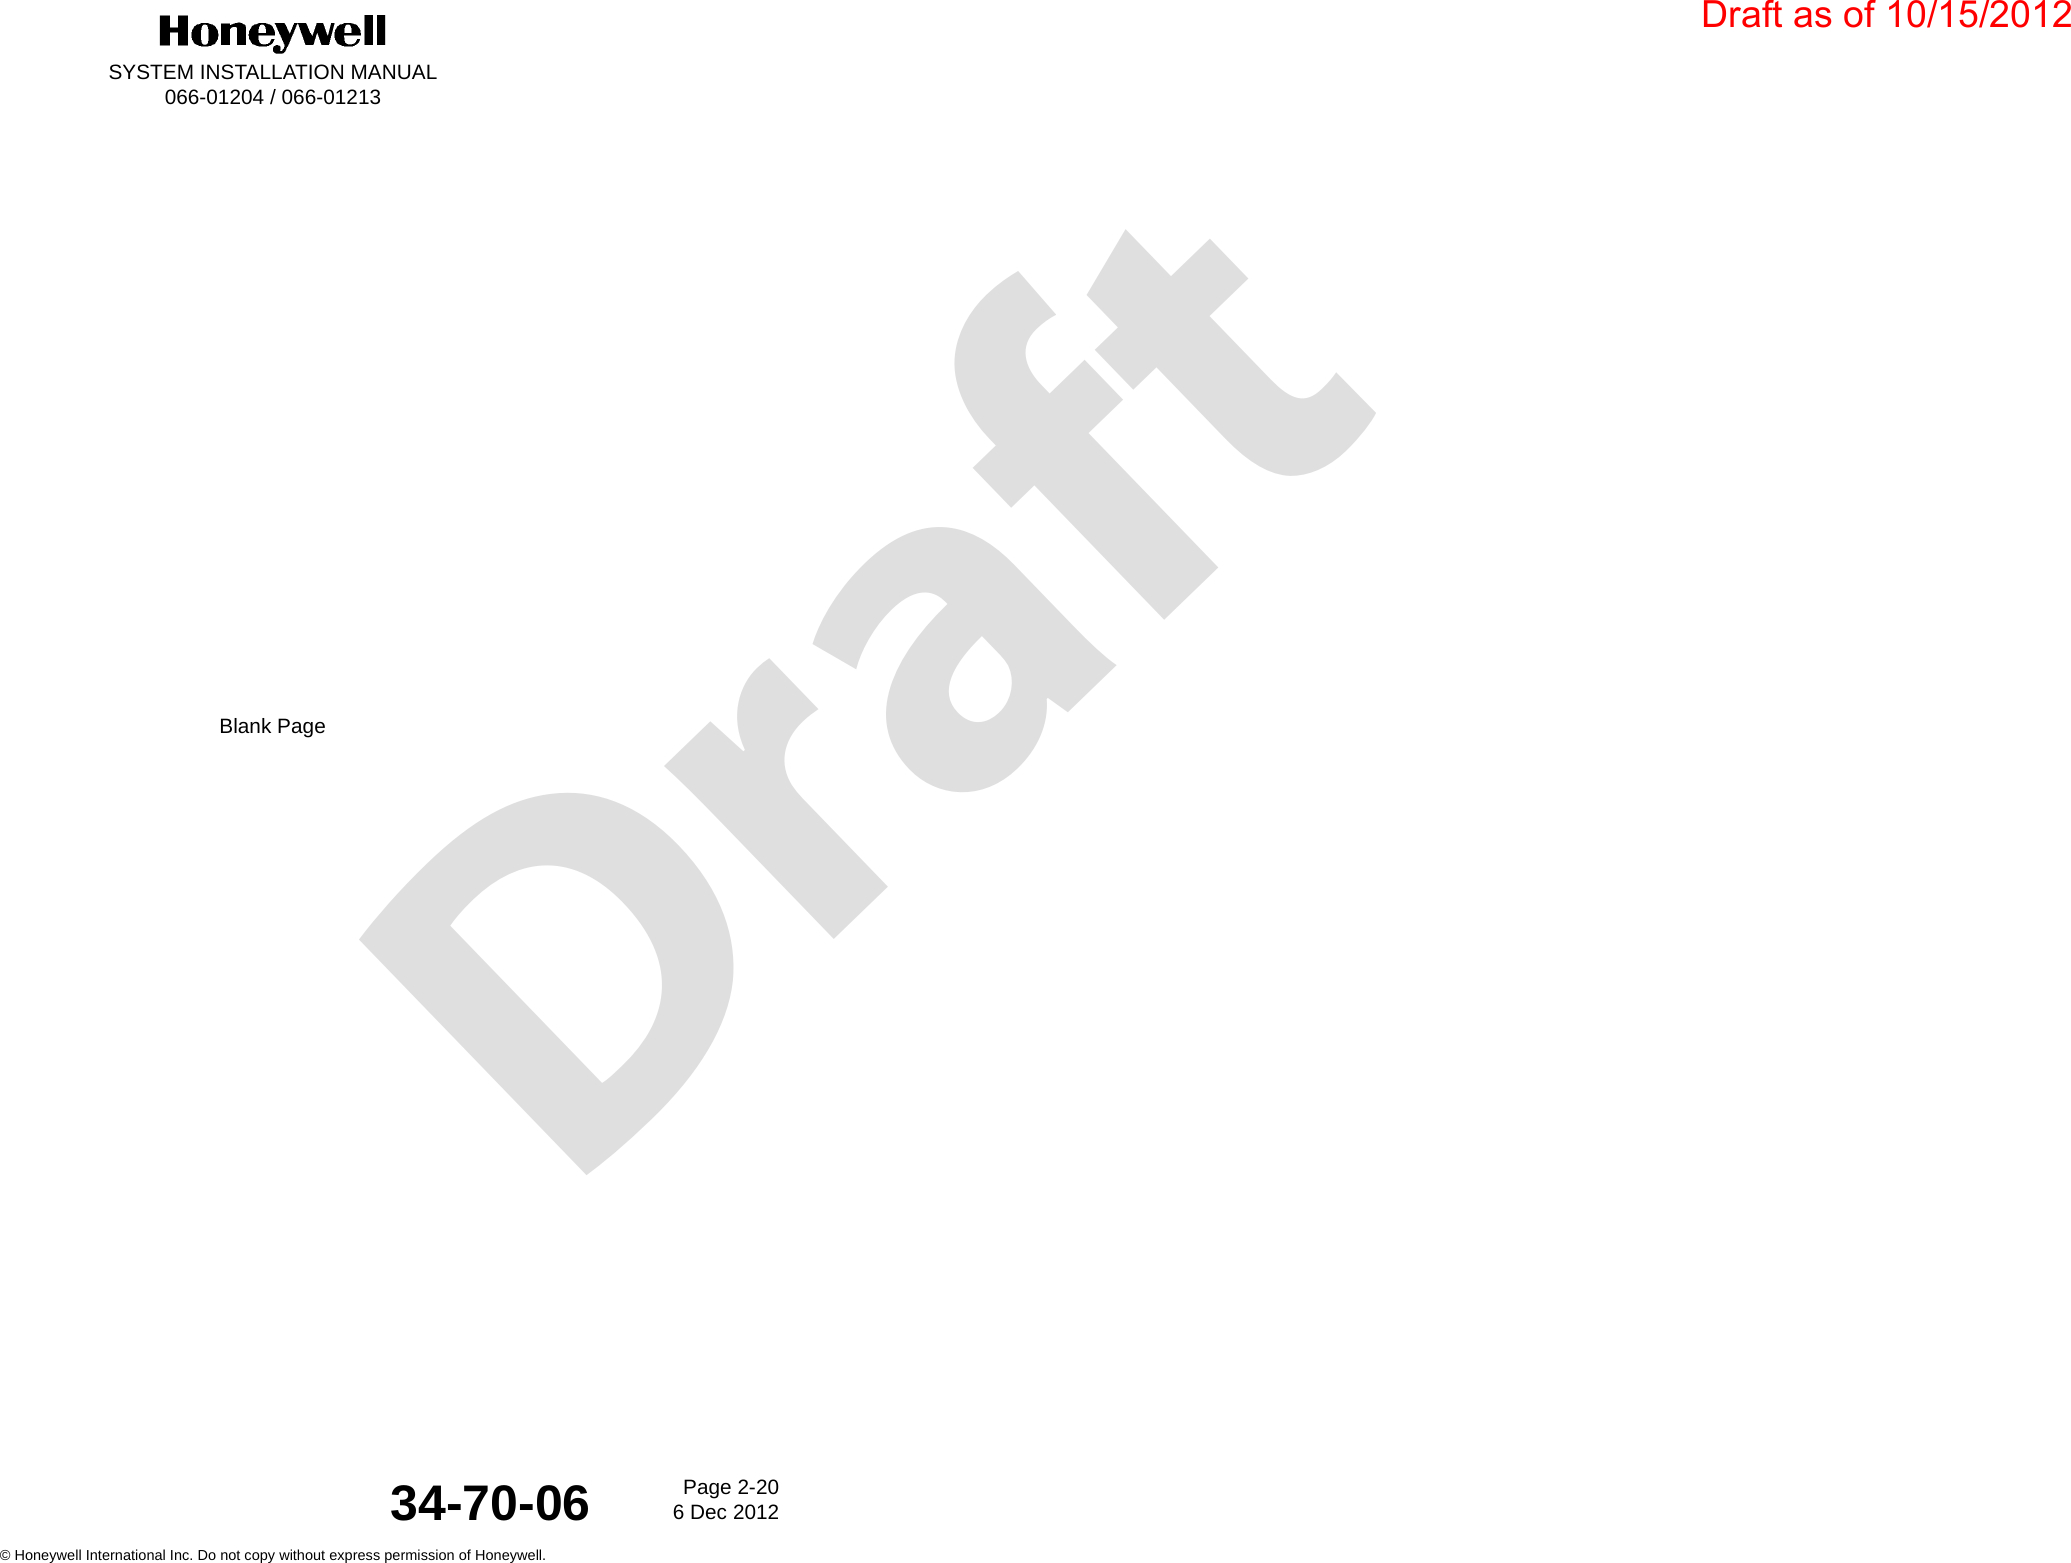 DraftSYSTEM INSTALLATION MANUAL066-01204 / 066-01213Page 2-206 Dec 2012© Honeywell International Inc. Do not copy without express permission of Honeywell.34-70-06Blank PageDraft as of 10/15/2012